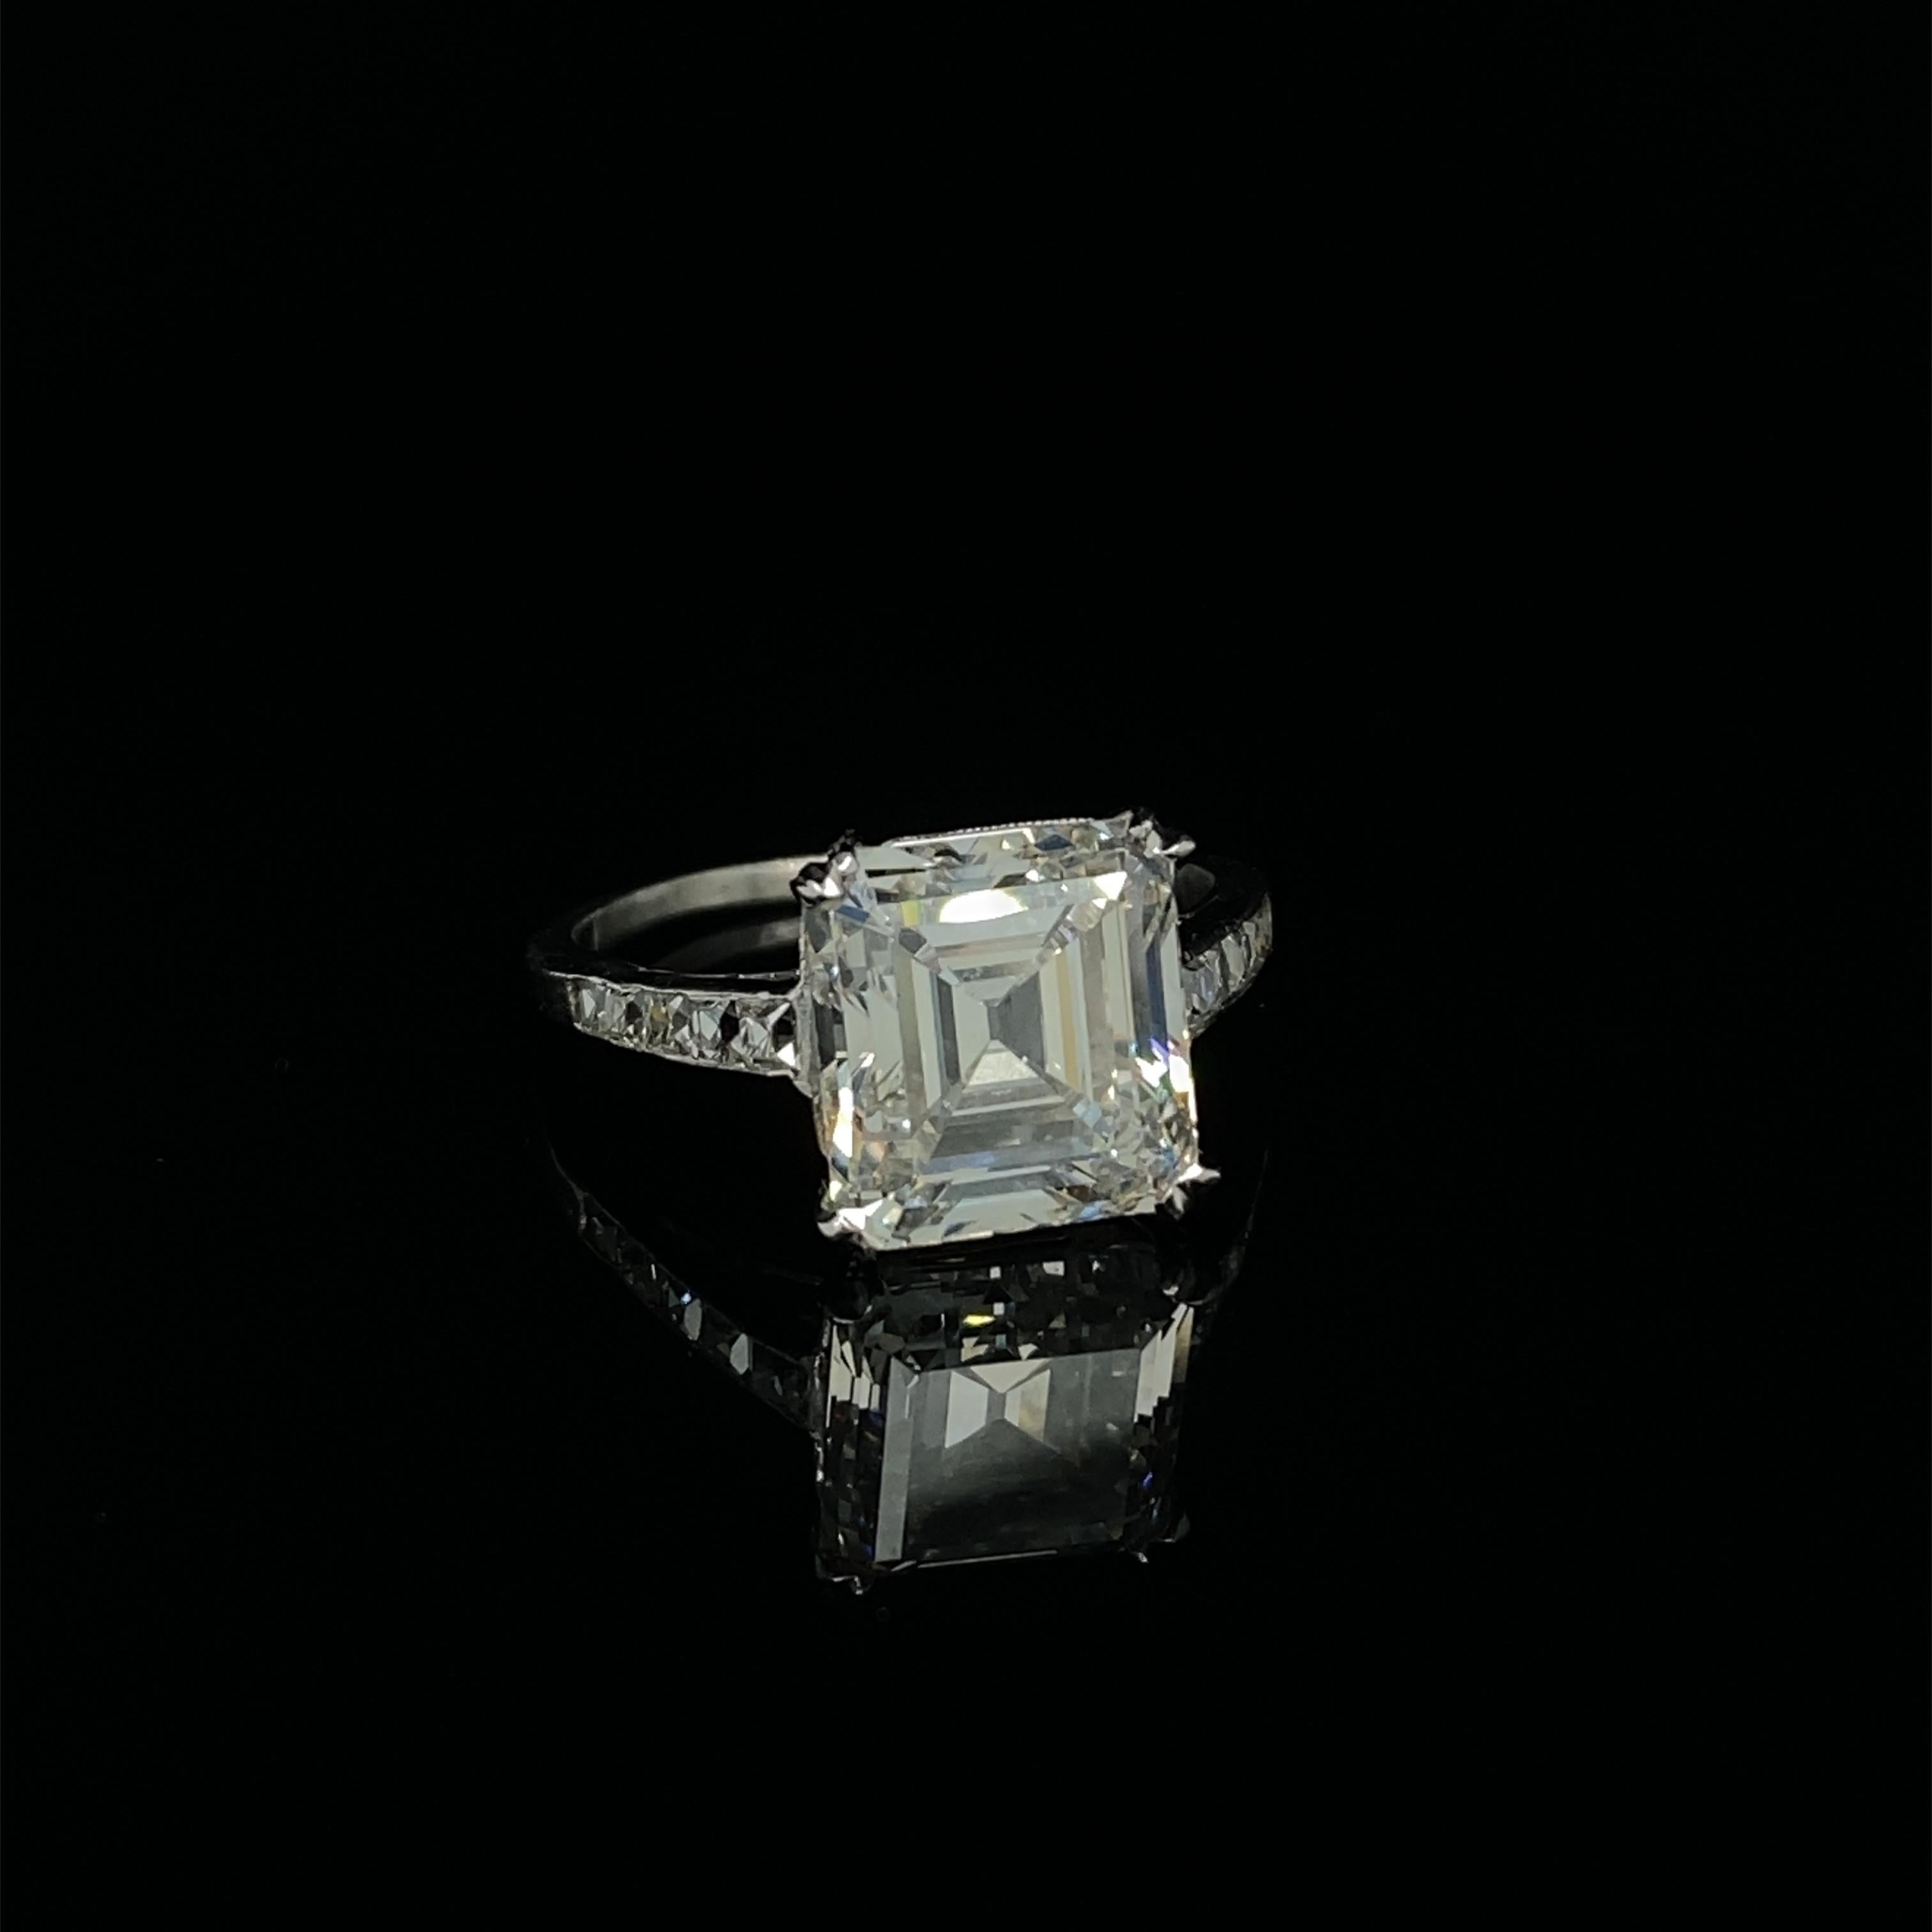 A Cartier Art Deco emerald cut diamond platinum engagement ring, 4.39 carat.

This stunning Art Deco emerald-cut diamond ring by Cartier is set with a beautifully elegant old style emerald-cut diamond weighing 4.39cts and of I colour and VS2